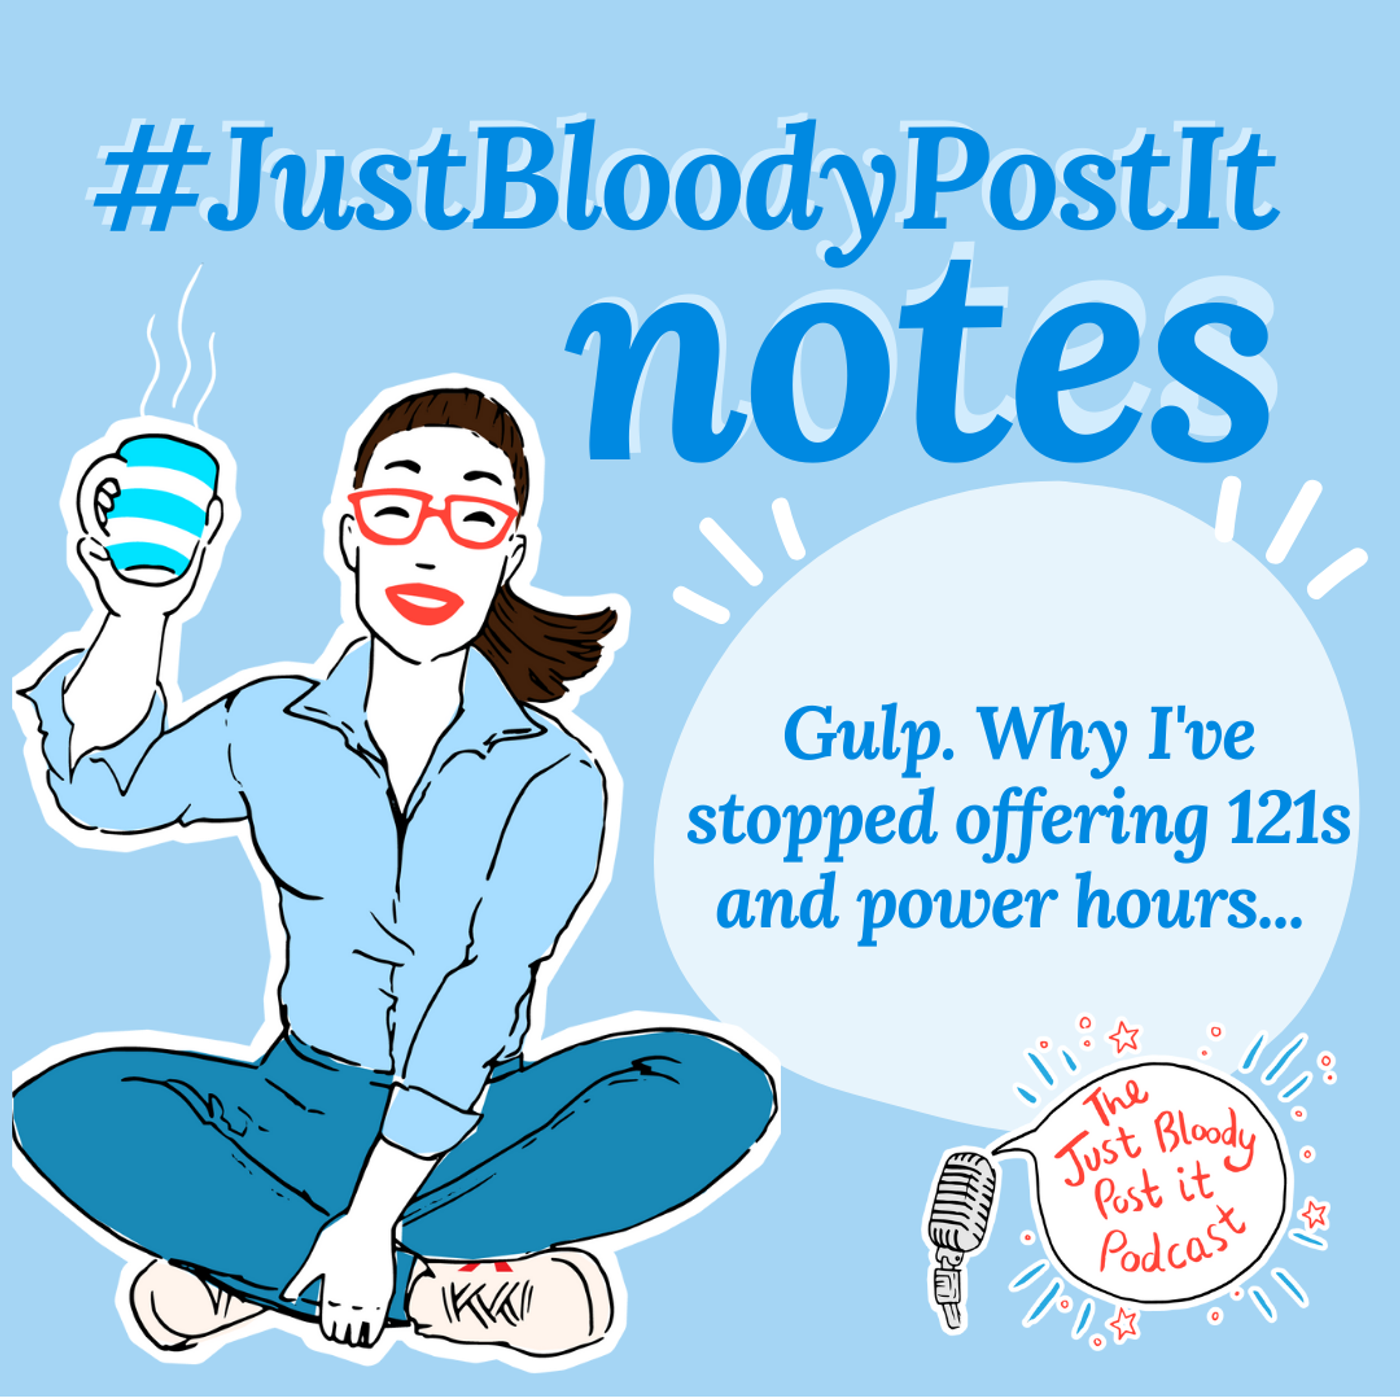 S2 Ep24: #JustBloodyPostIt note: saying no to 121s